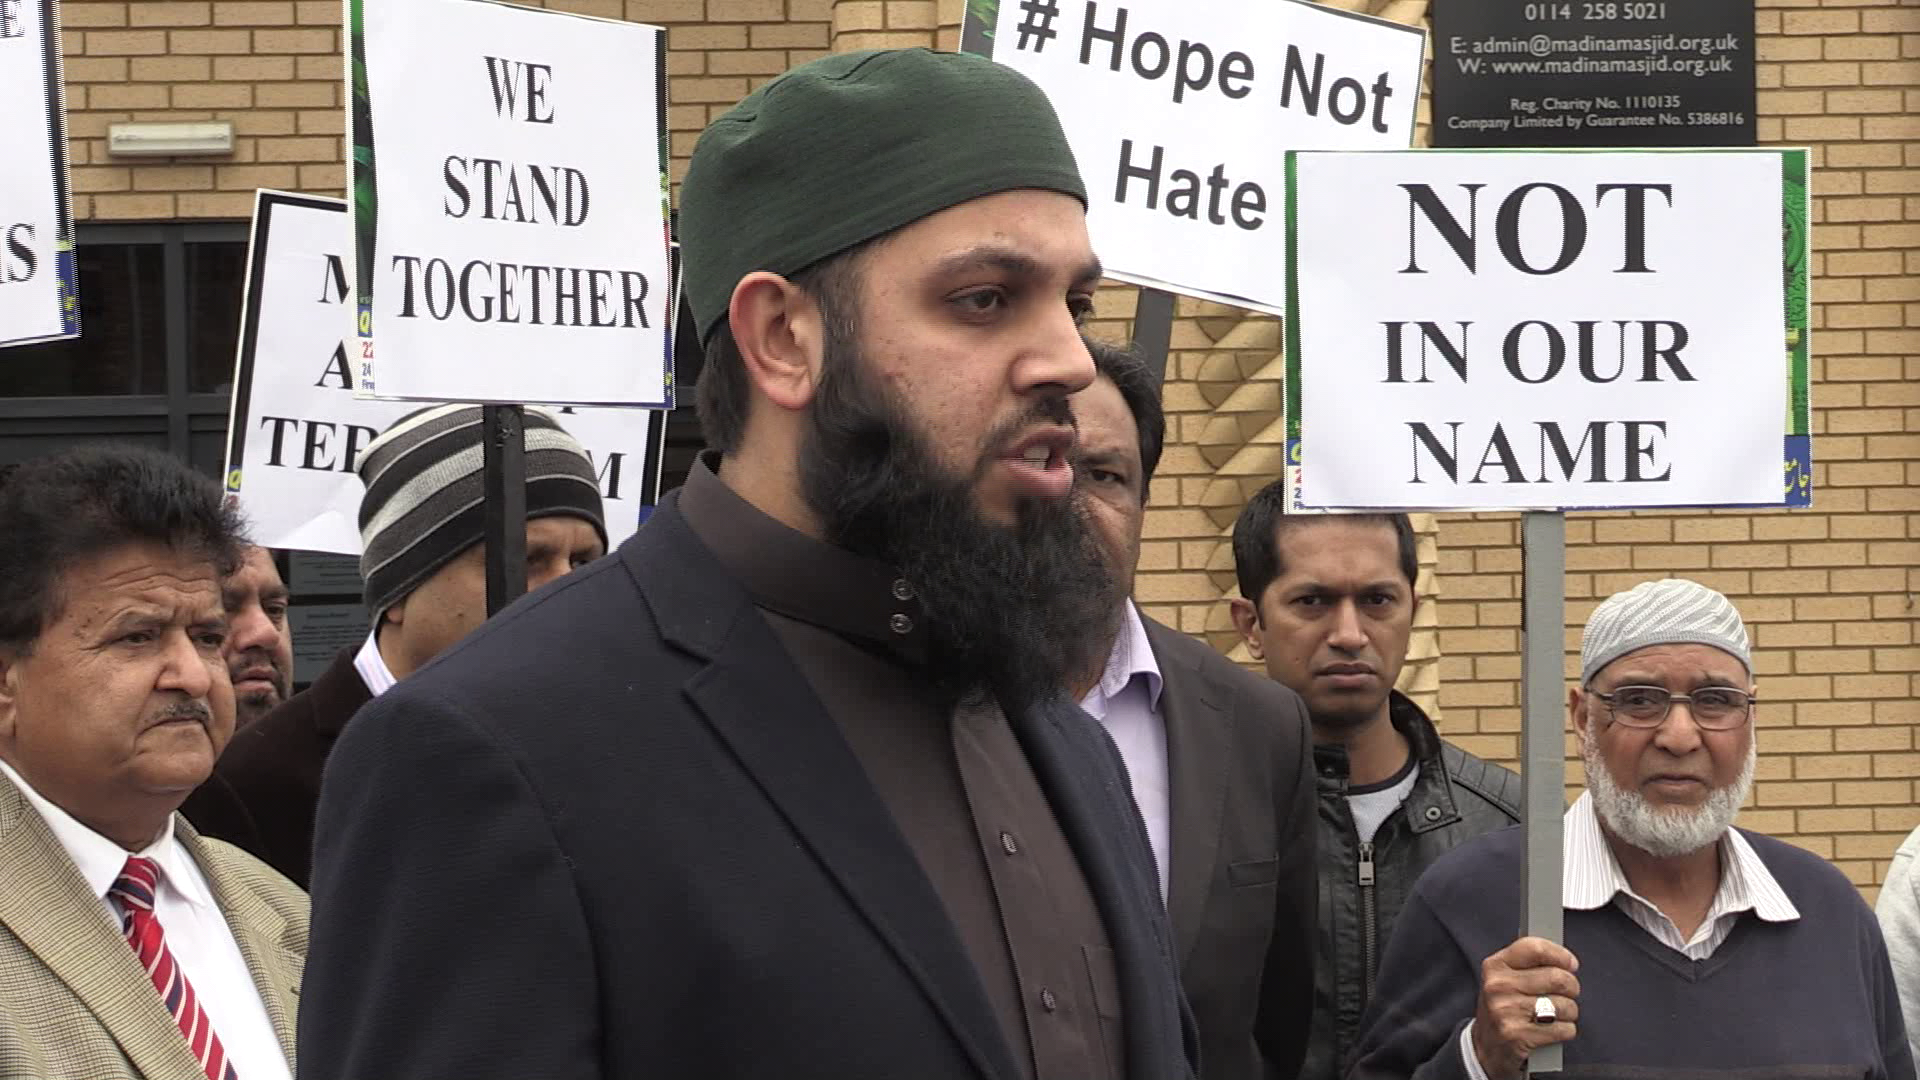 Muslims angered by hate mail